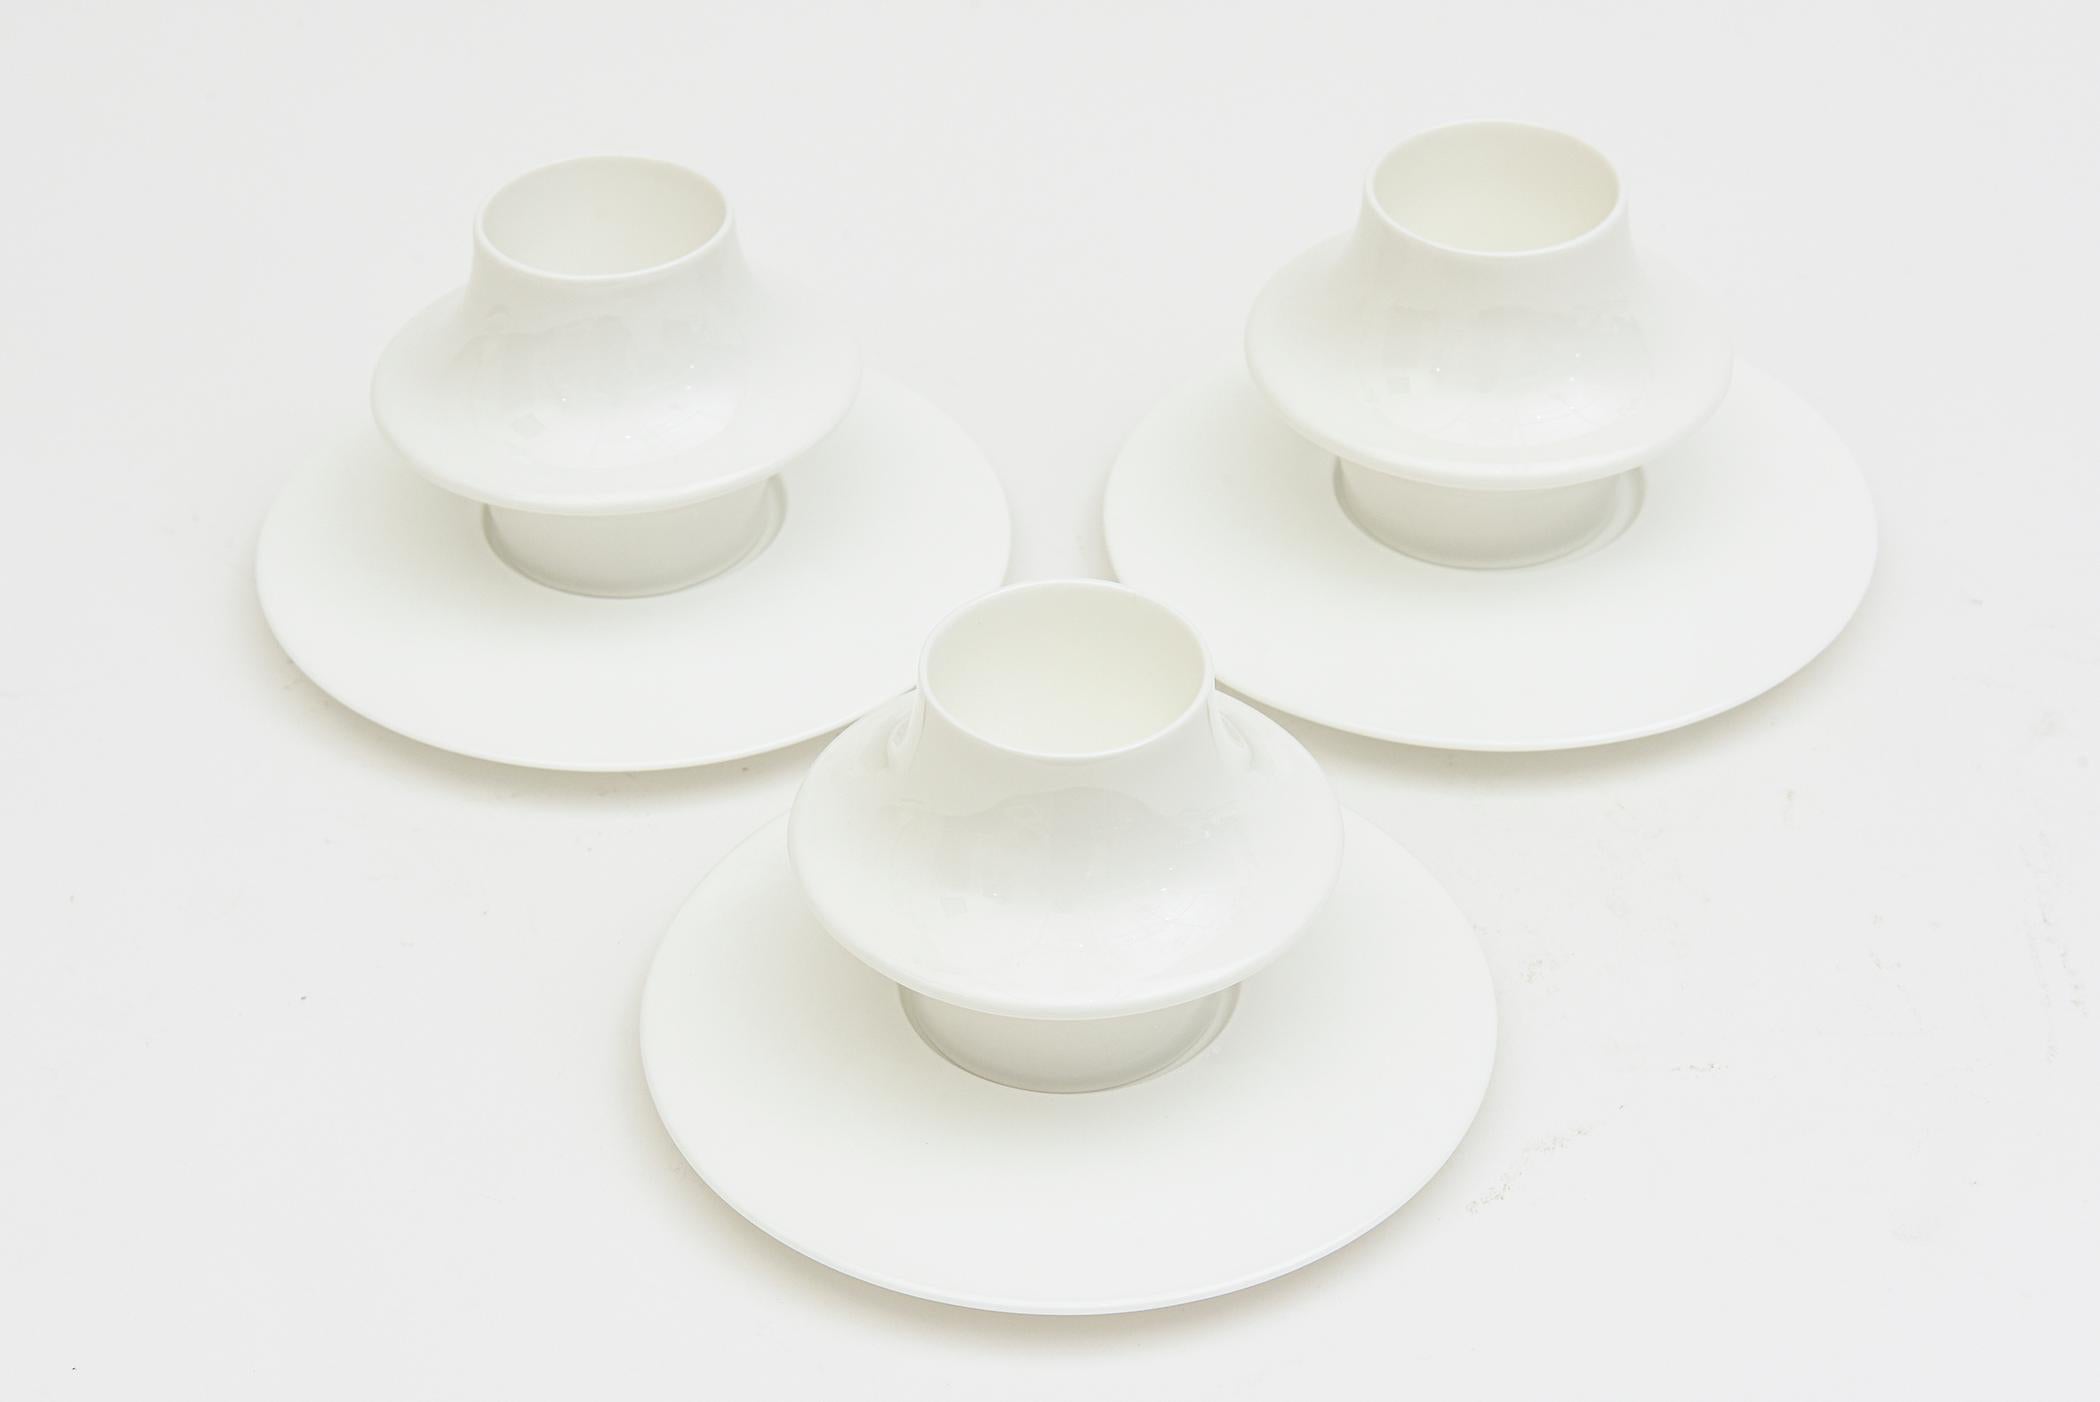 This fabulous modernist set of 7 bone china white Alessi demitasse expresso cups and saucers were designed by Tom Kovac and were part of the Tea and Flowers project prior. it is called the Supa Mocha pattern. The set was produced in a few copies in